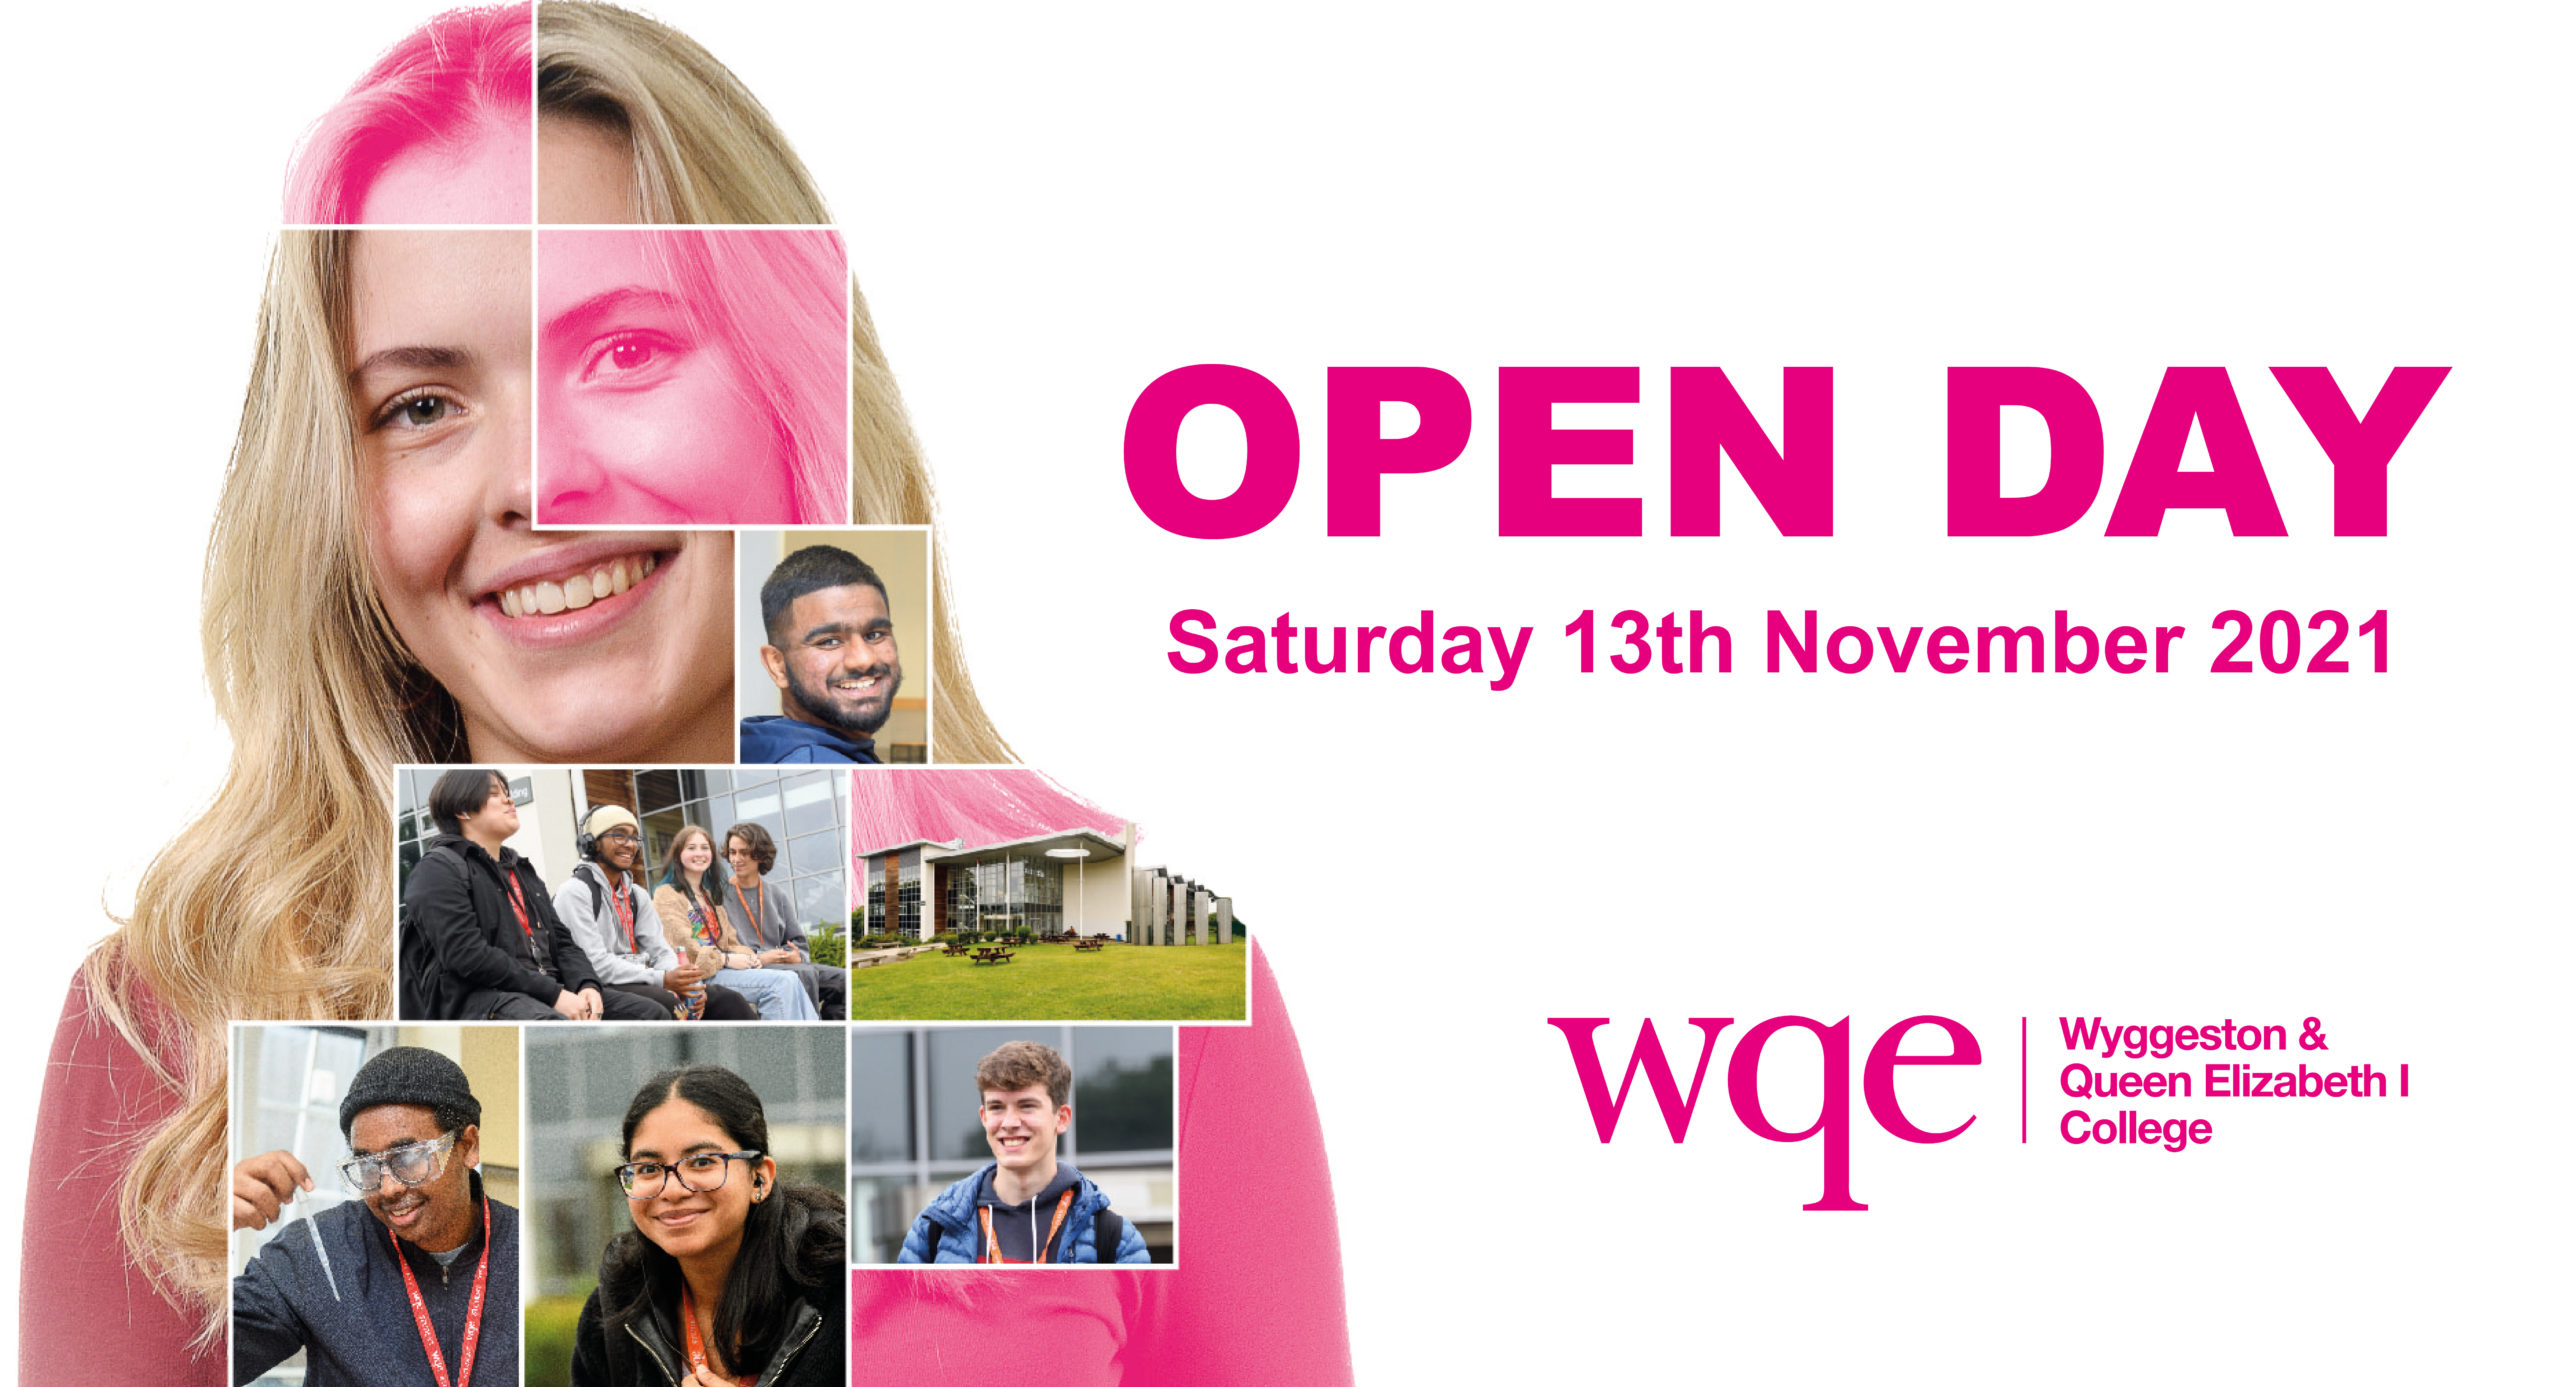 a picture of the open day website cover